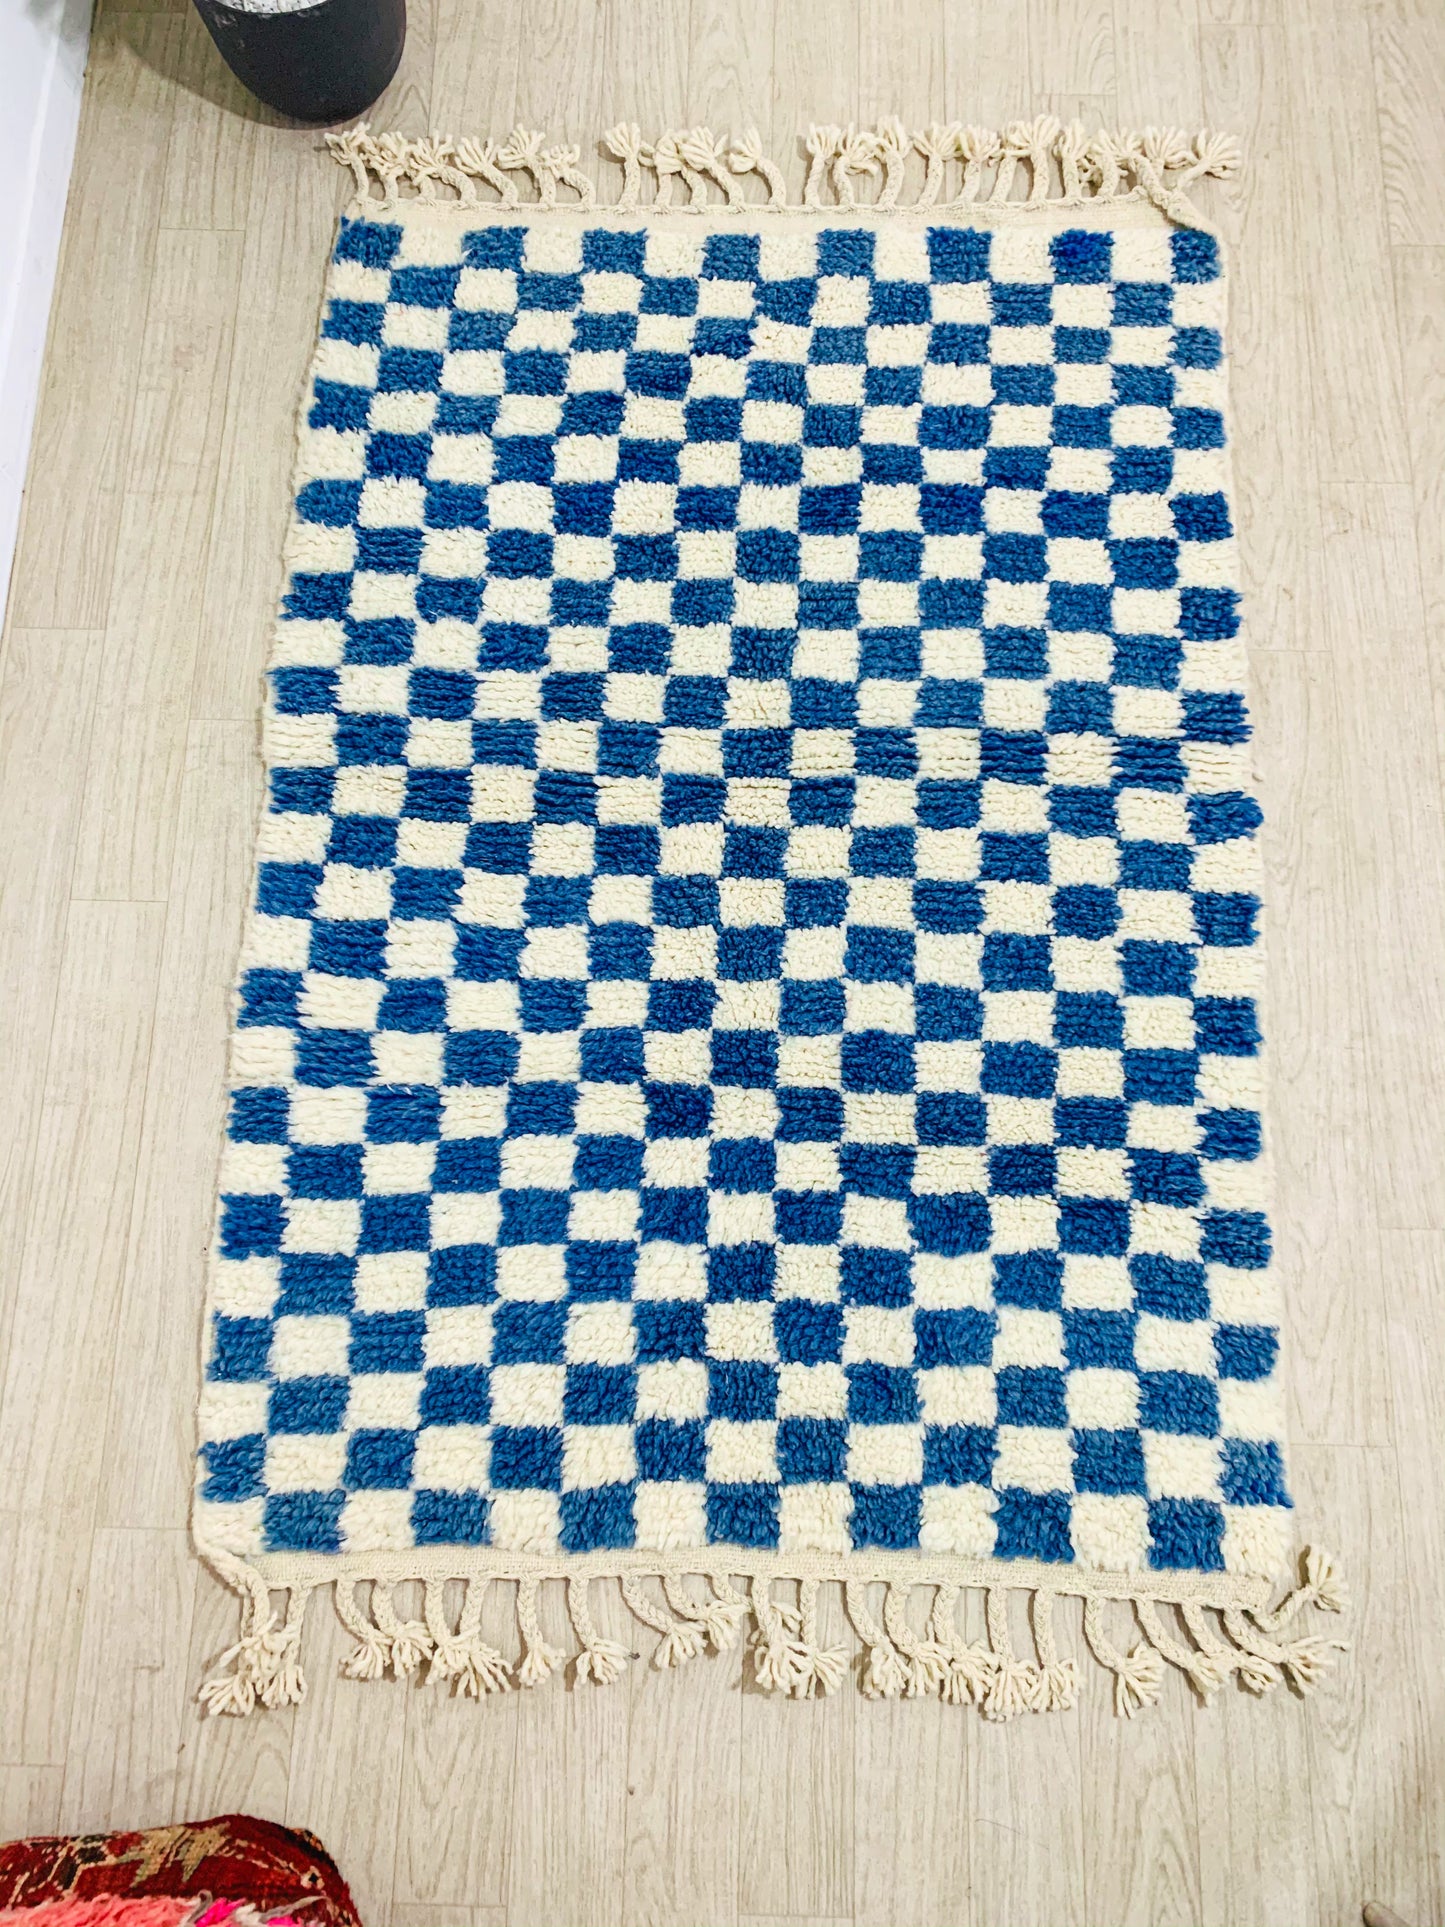 blue-and-white-moroccan-checkered-rug